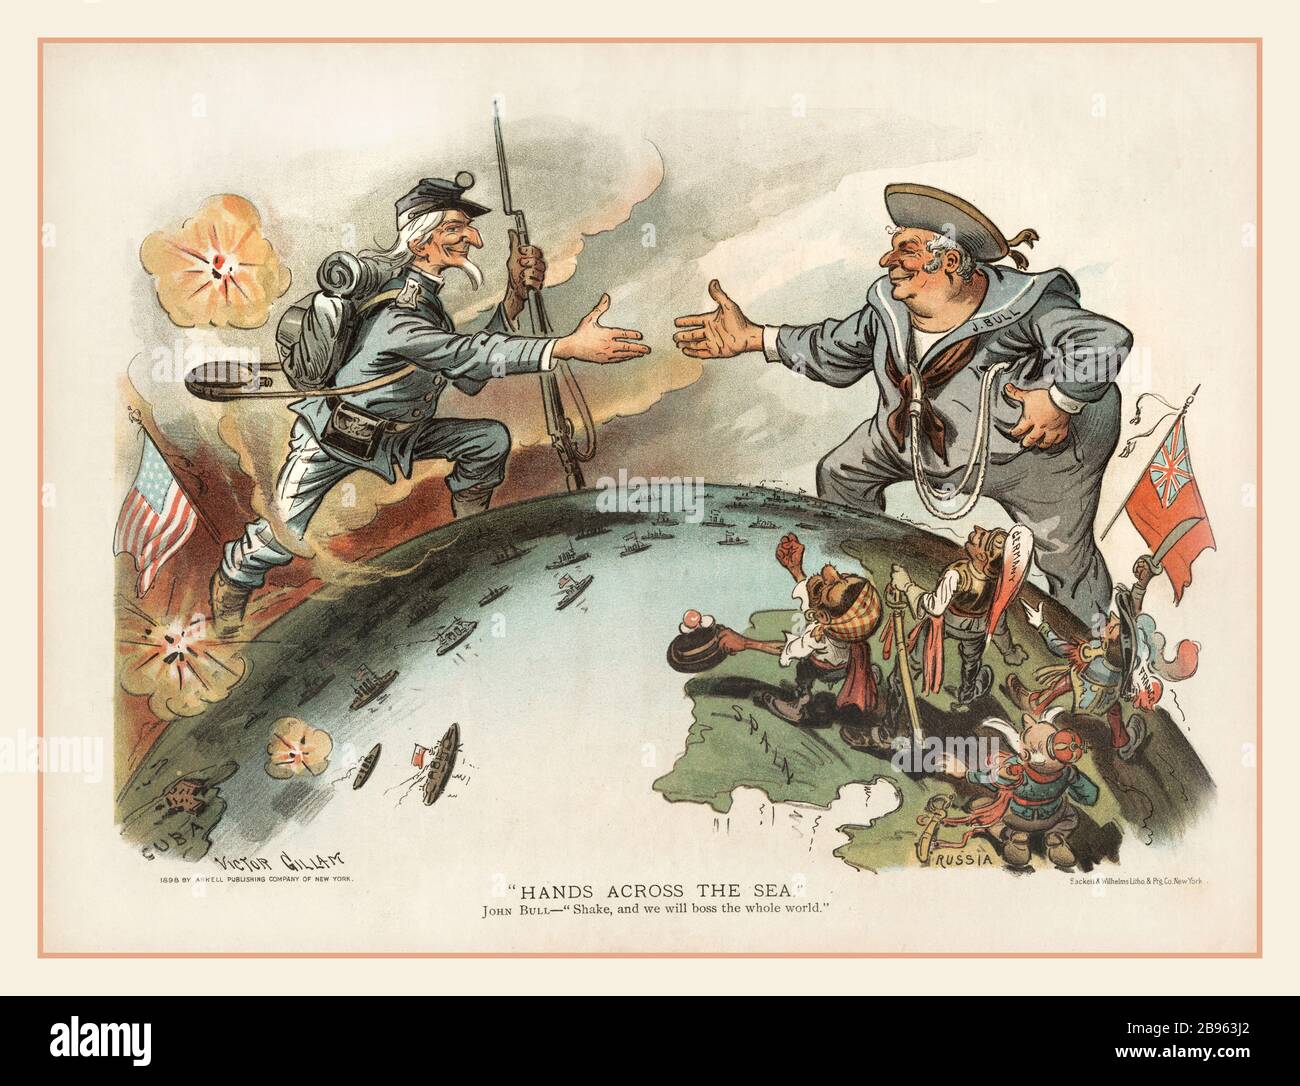 ‘HANDS ACROSS THE SEA’ Vintage BRITISH / AMERICAN 1898 cartoon map, soldier Uncle Sam reaching across the Atlantic to shake hands with sailor John Bull. Together, they shake hands to 'Boss the whole world.' Battles in the Philippines and Cuba are behind and below Uncle Sam, while small Europeans are shown rioting and appealing to John Bull. An 1890s cartoon map supporting and encouraging American U.S. expansionism. Stock Photo